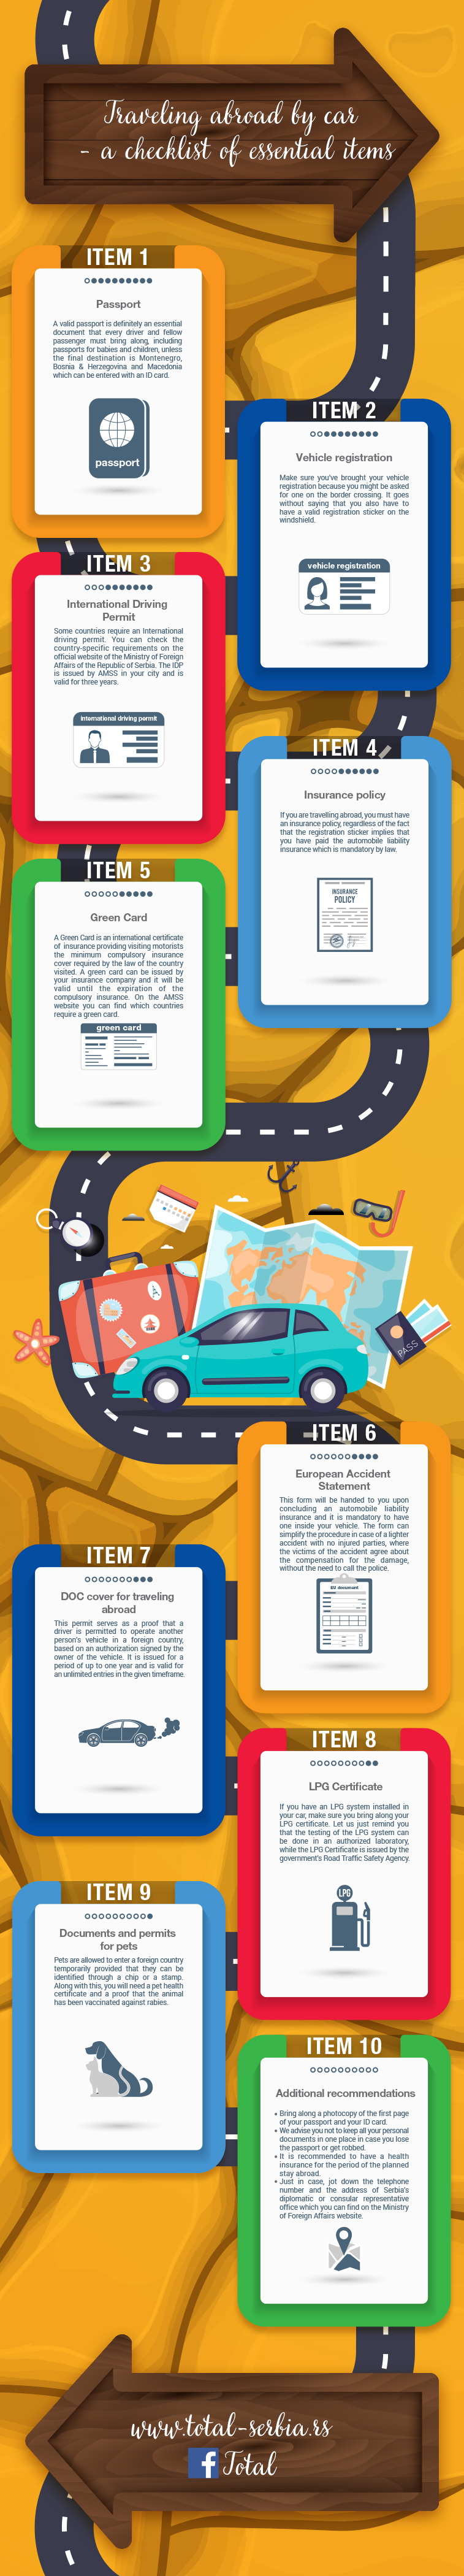 Traveling abroad by car - a checklist of essential items
